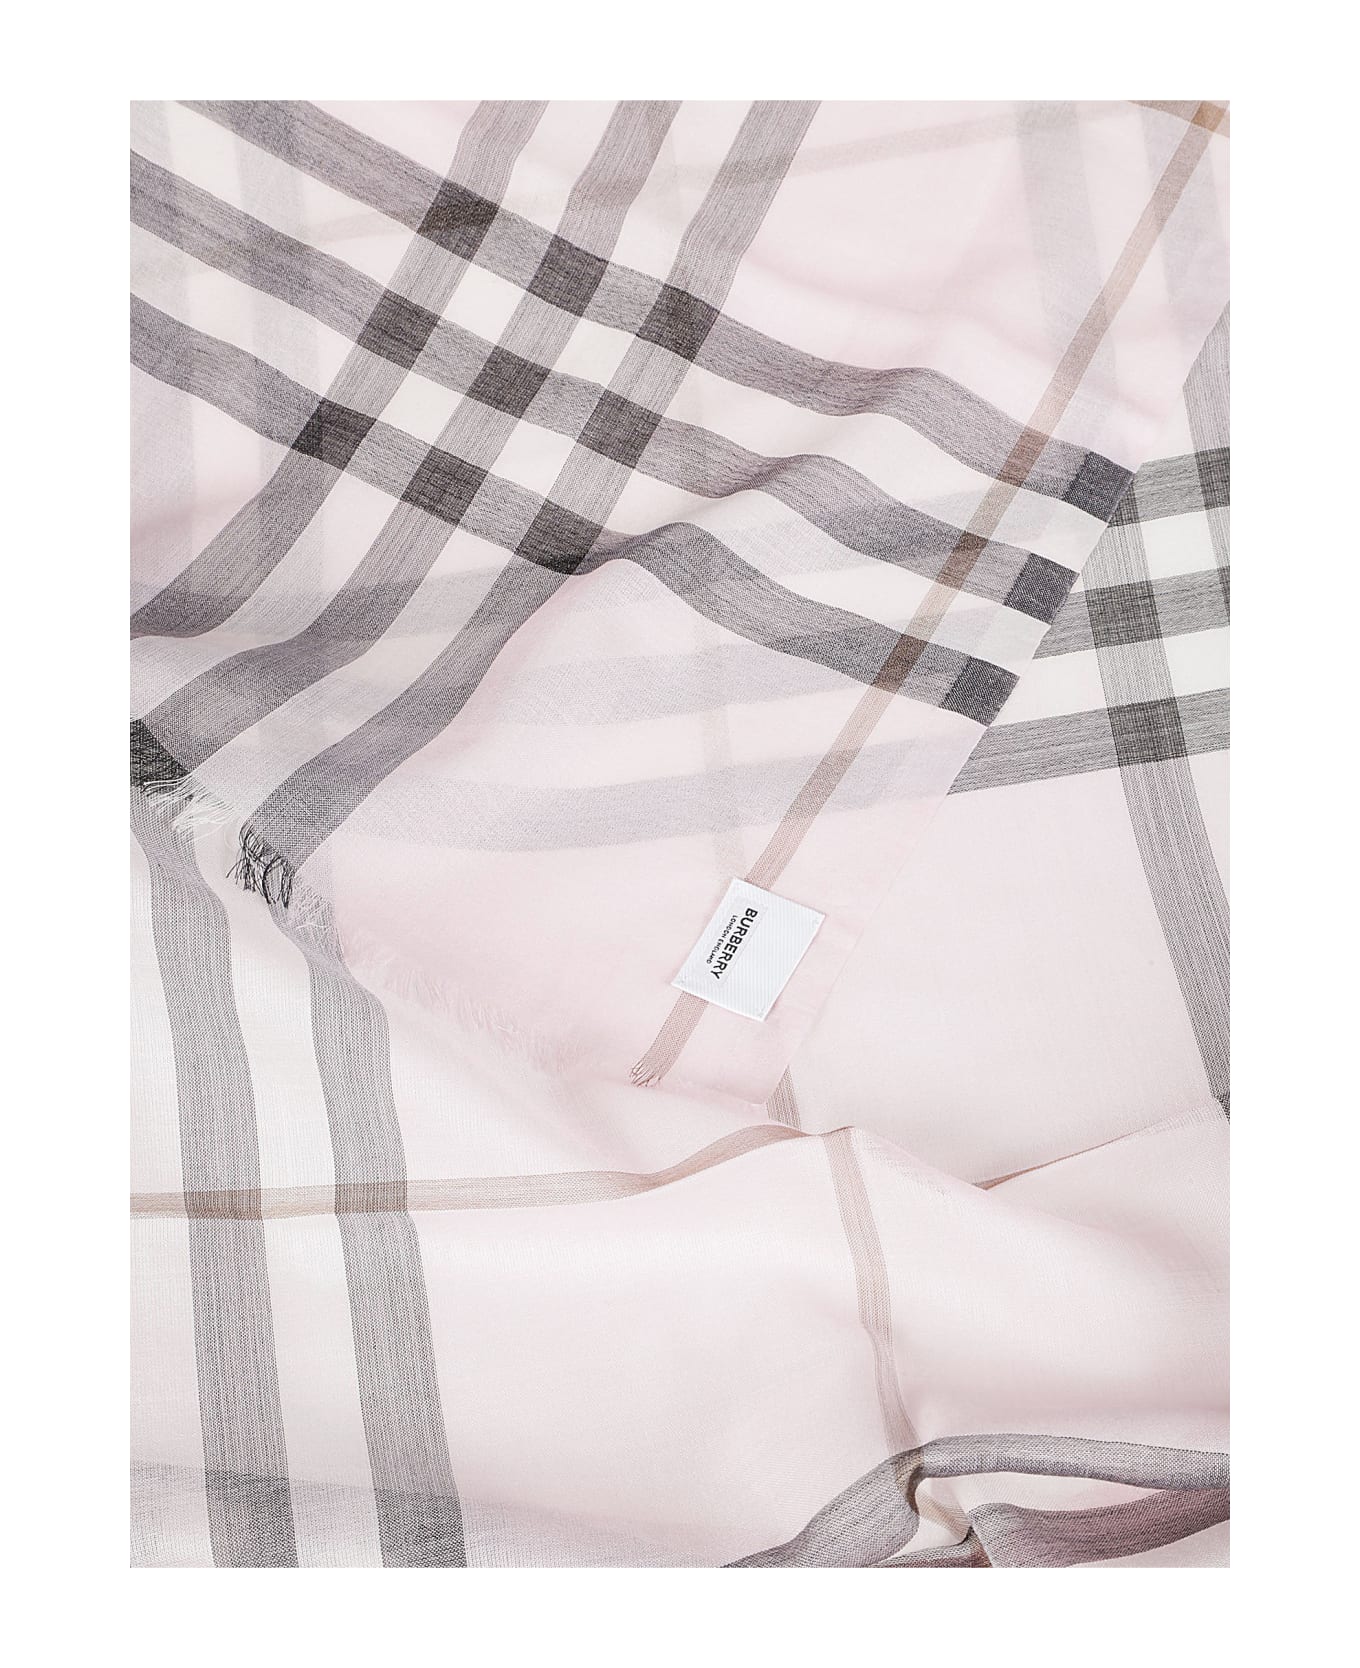 Burberry Giant Check Gauze Scarf - Pale Candy Pink